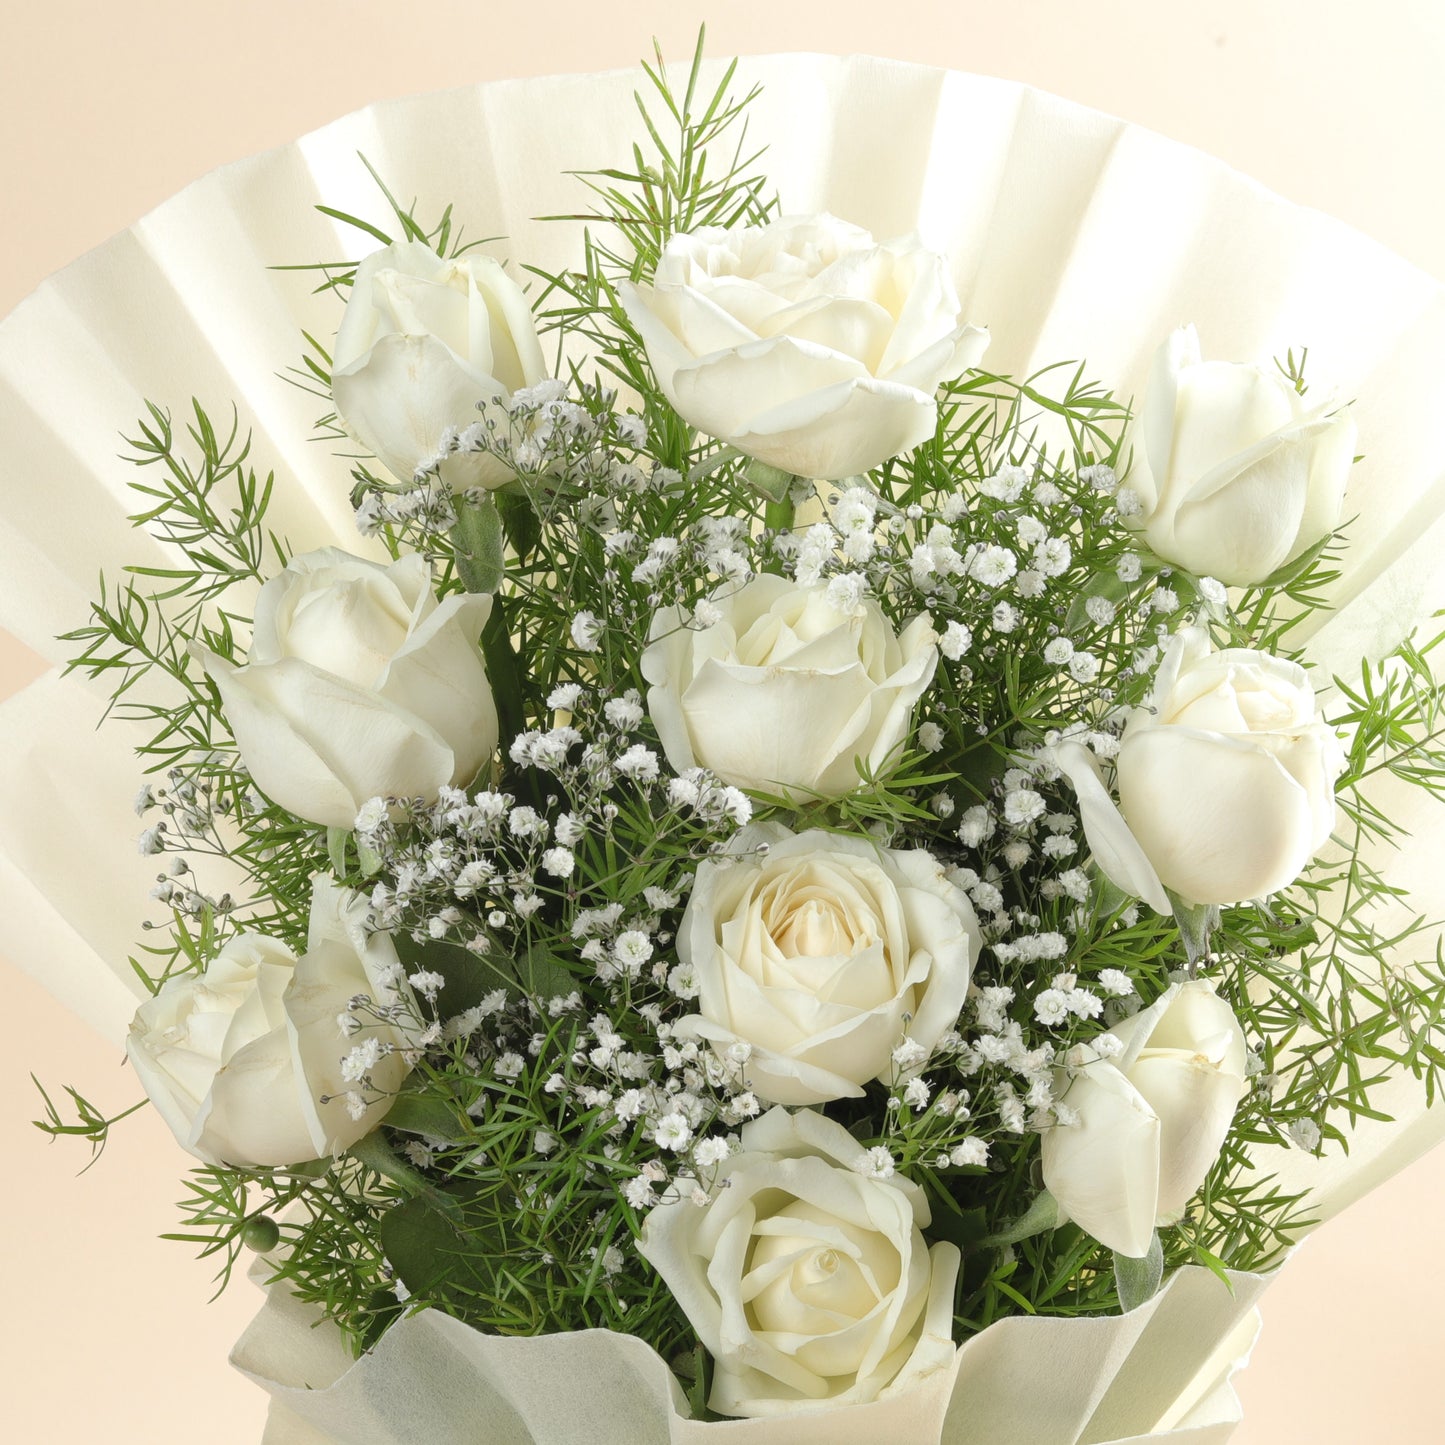 10 White Roses Bouquet